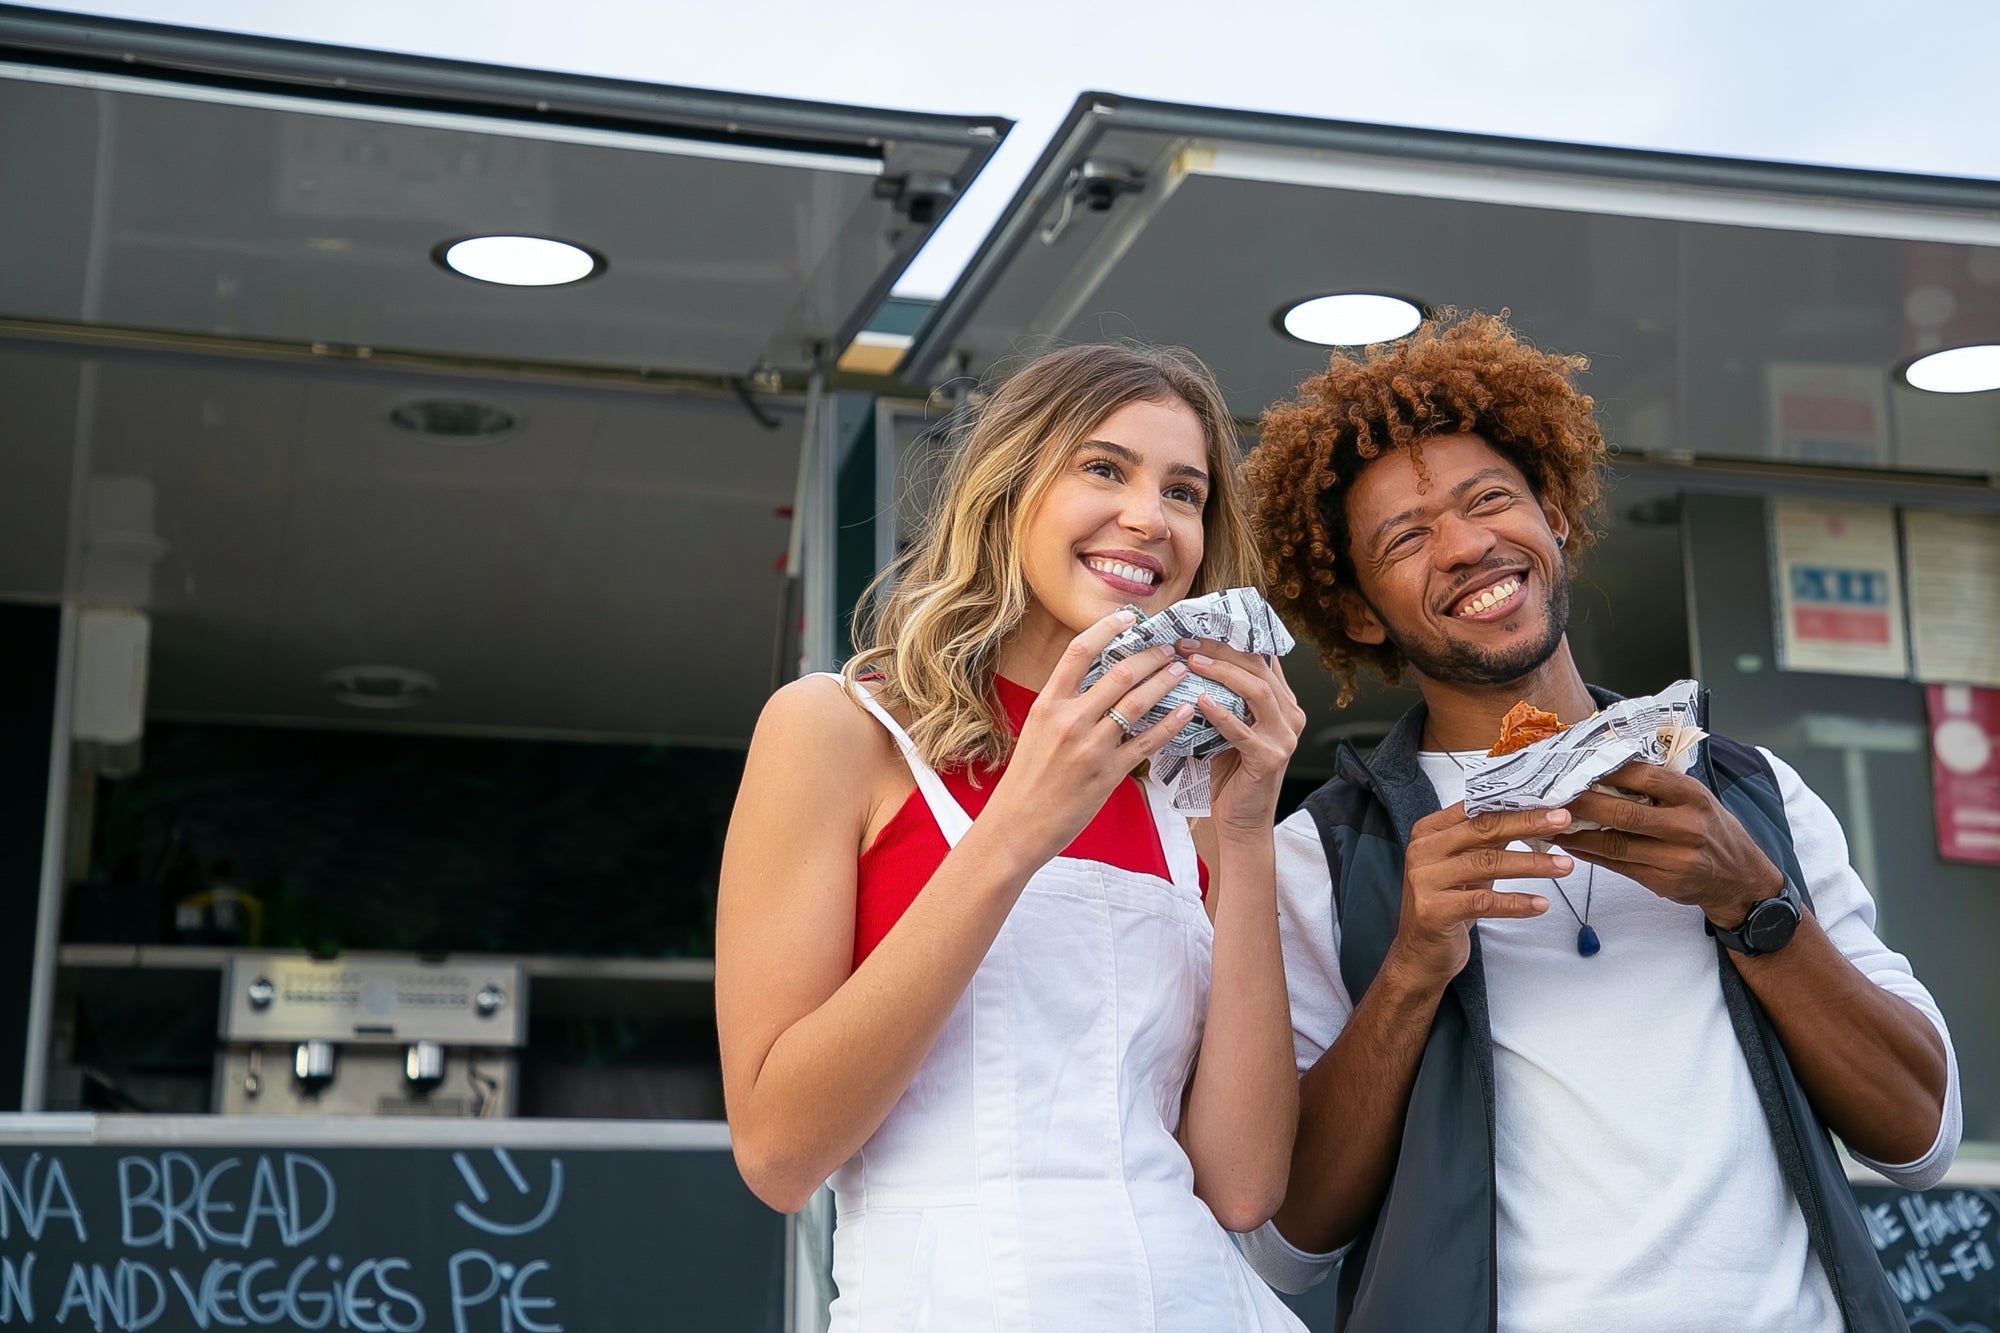 5 Food Trucks Who Are Running Successful, Eco-friendly Businesses